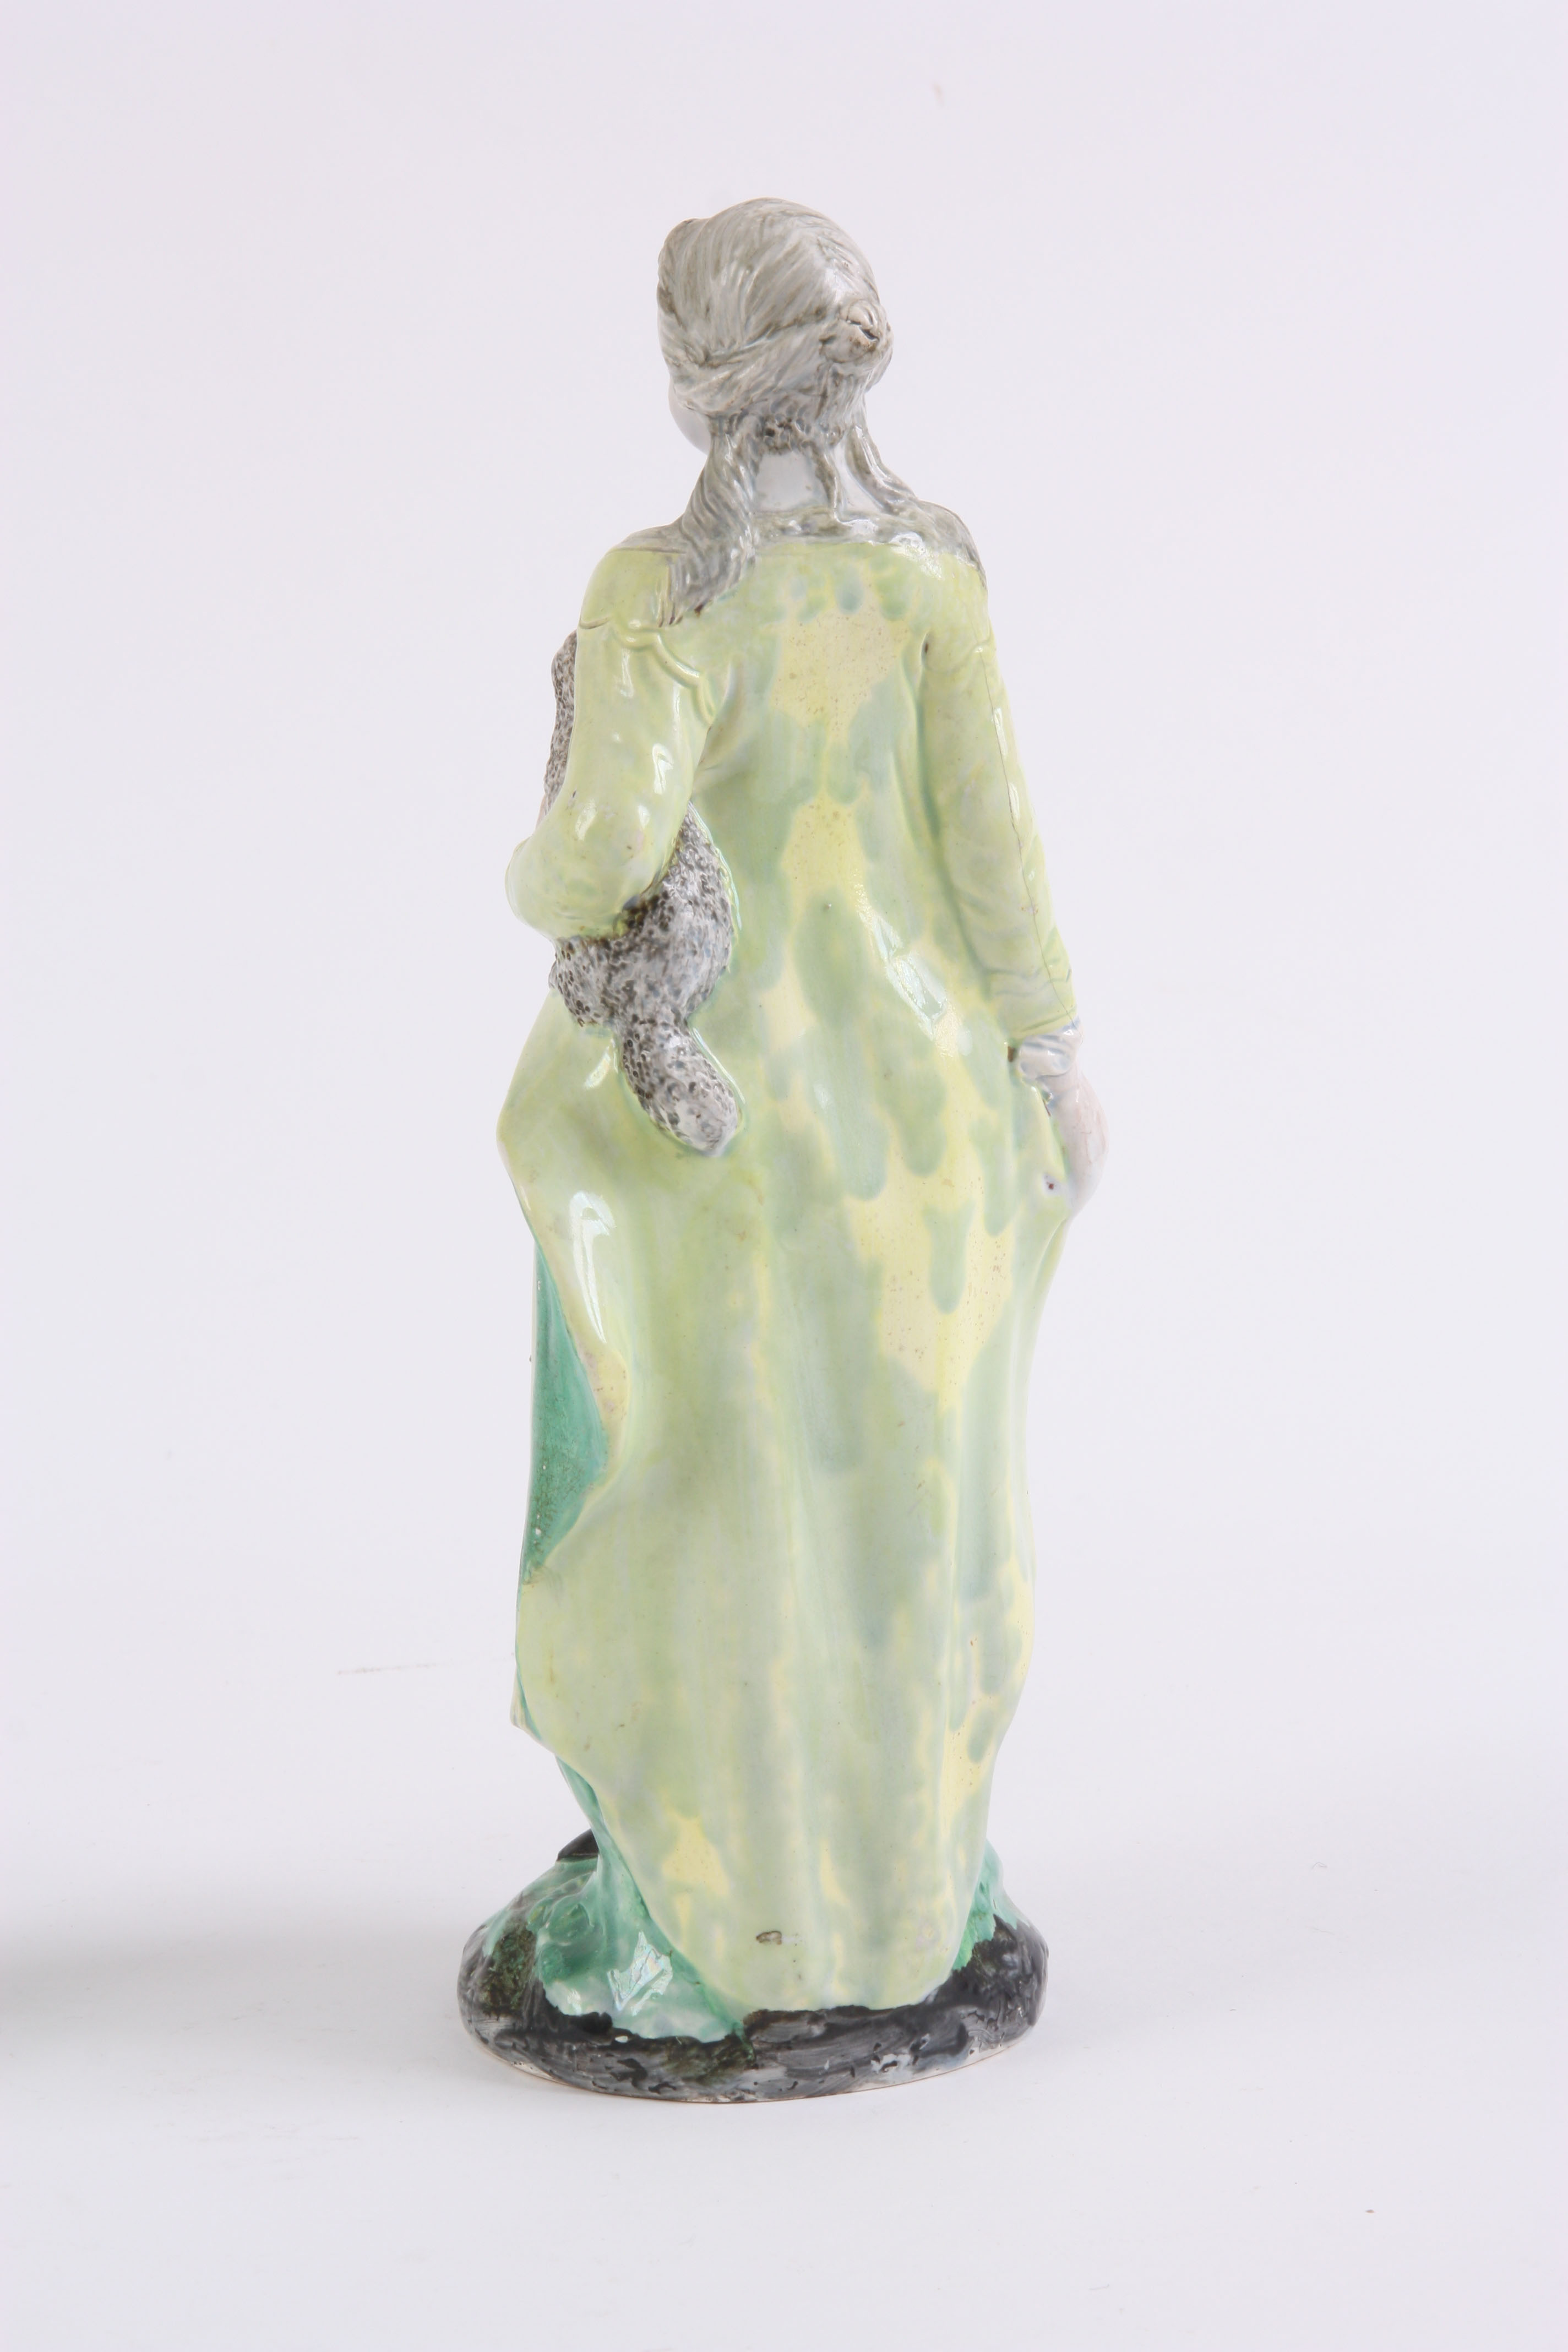 AN 18TH/EARLY 19TH CENTURY PRATT TYPE HOLLOW BASE POLYCHROME SHEPHERDESS FIGURE 26cm high and a - Image 5 of 13